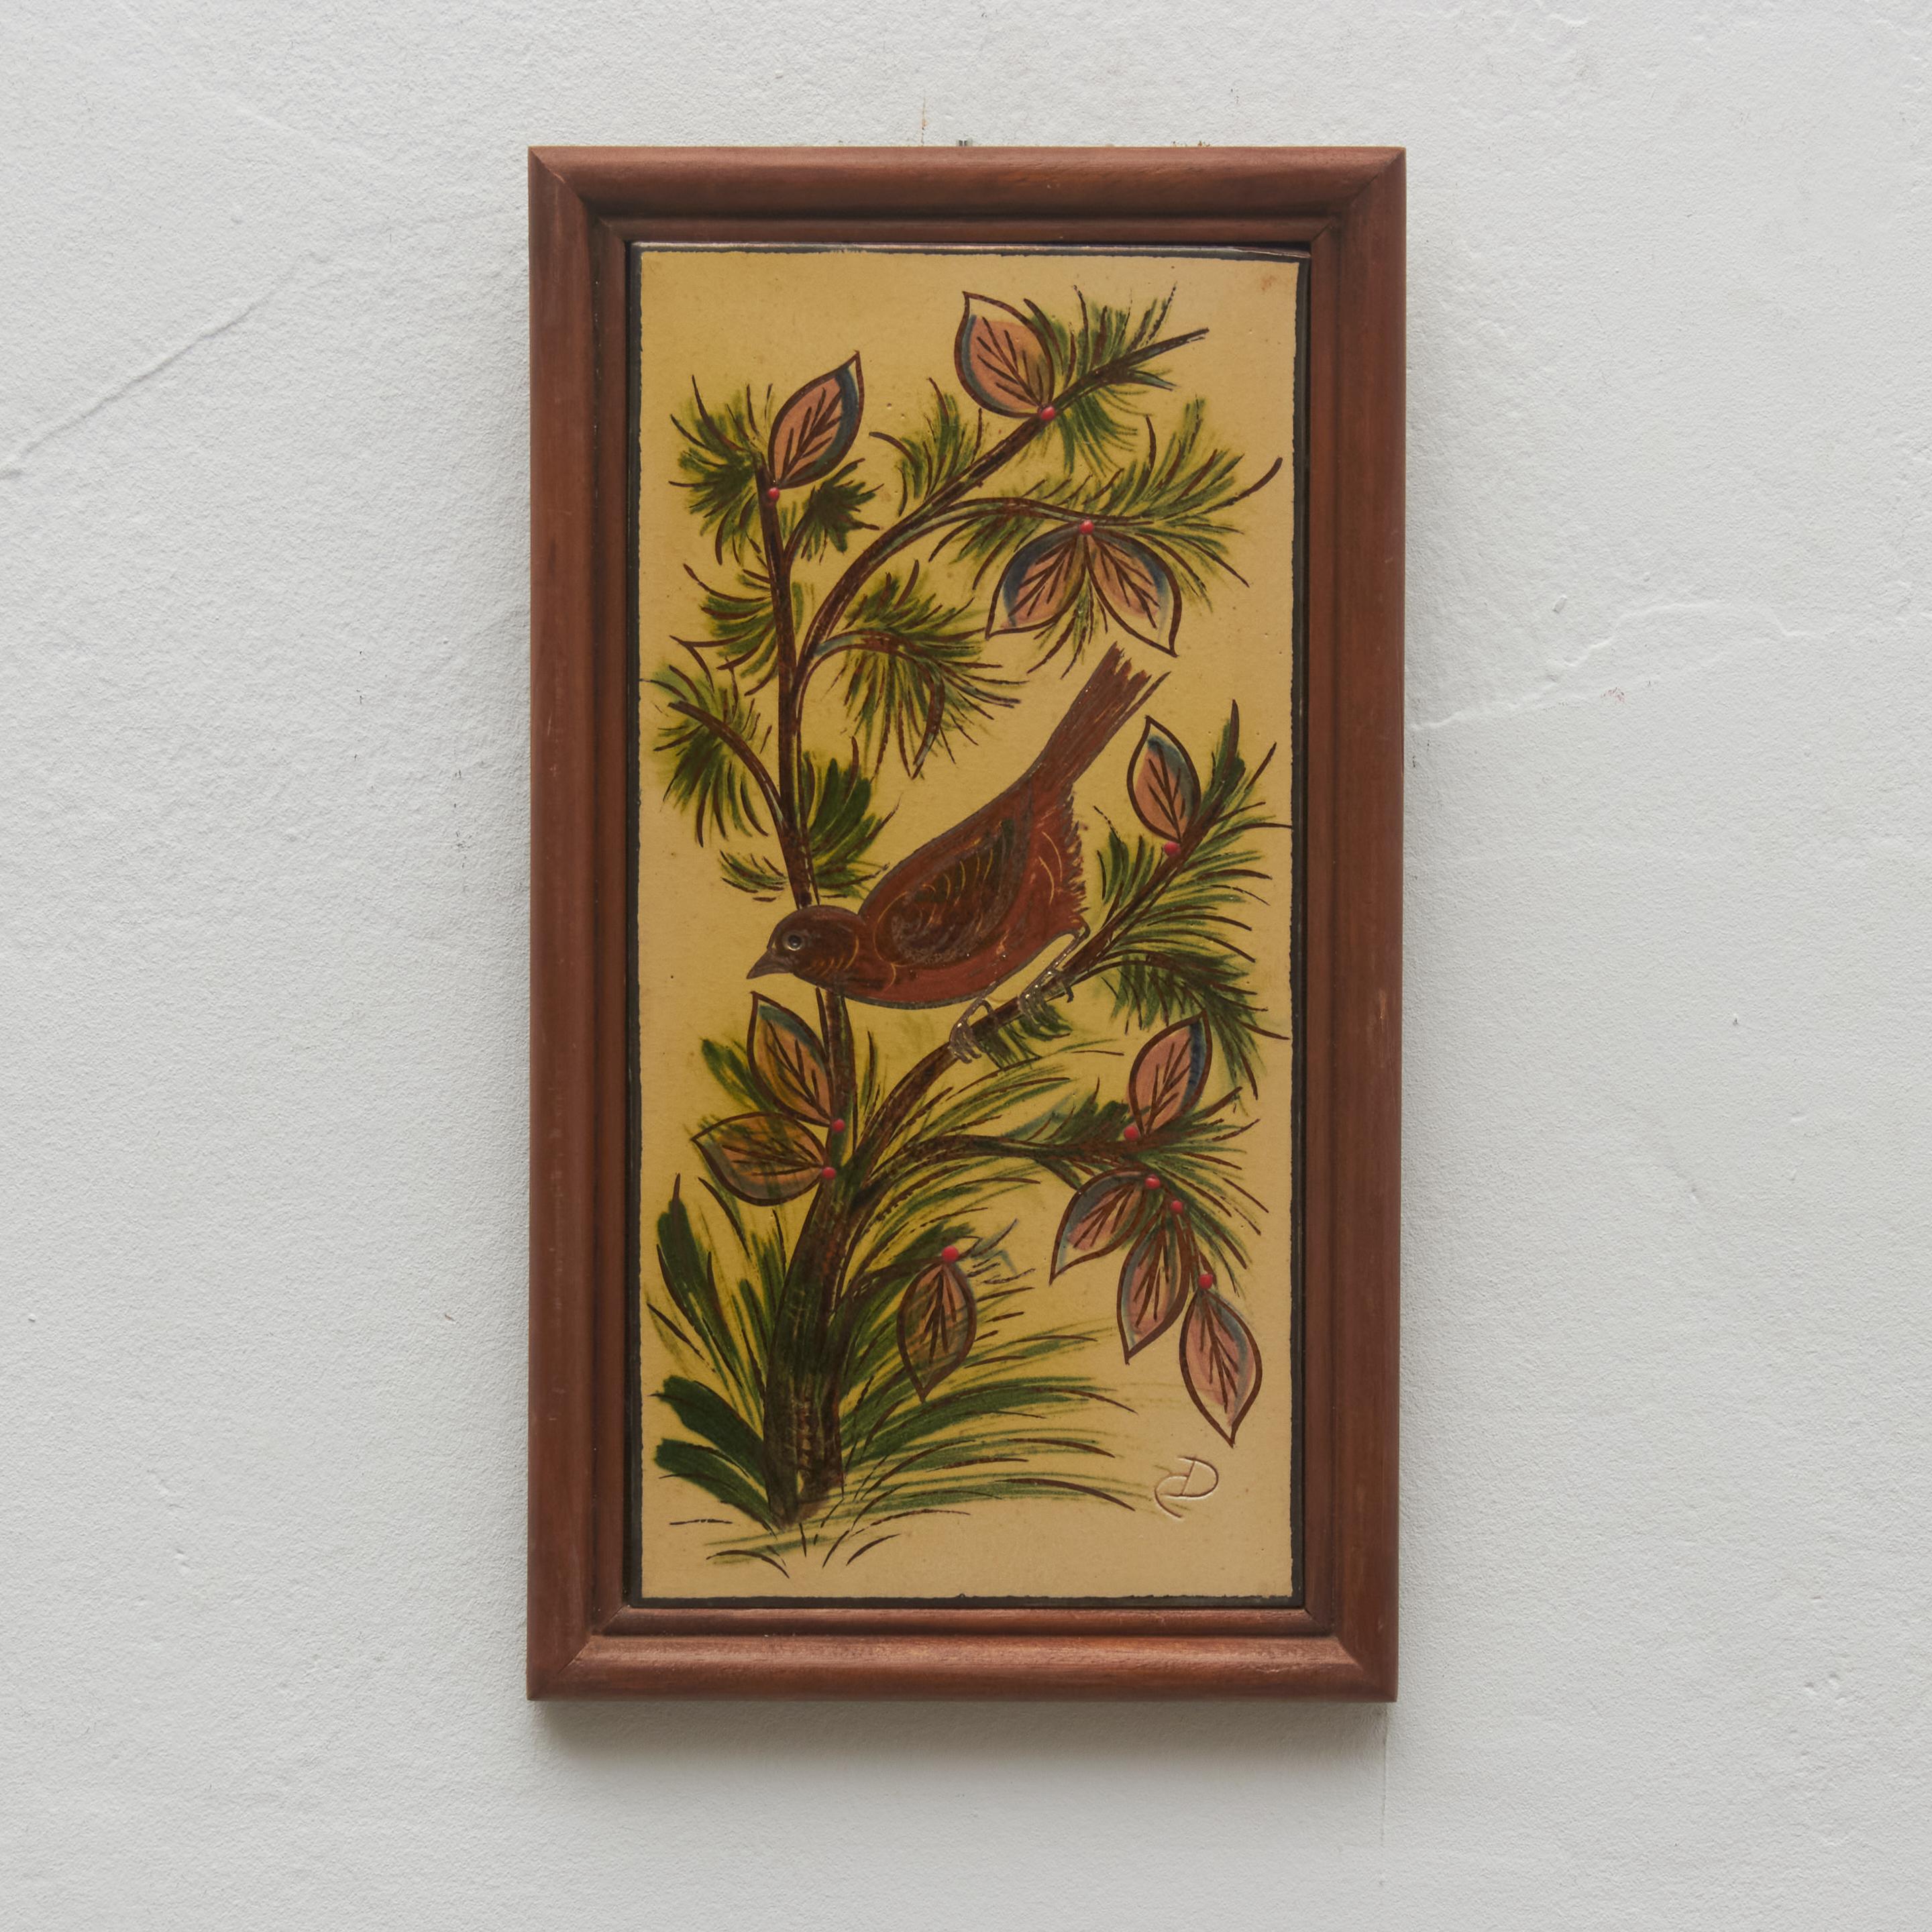 Ceramic hand painted artwork of a bird, designed by Catalan artist Diaz Costa, circa 1960.
Framed. Signed.

In original condition, with minor wear consistent of age and use, preserving a beautiul patina.